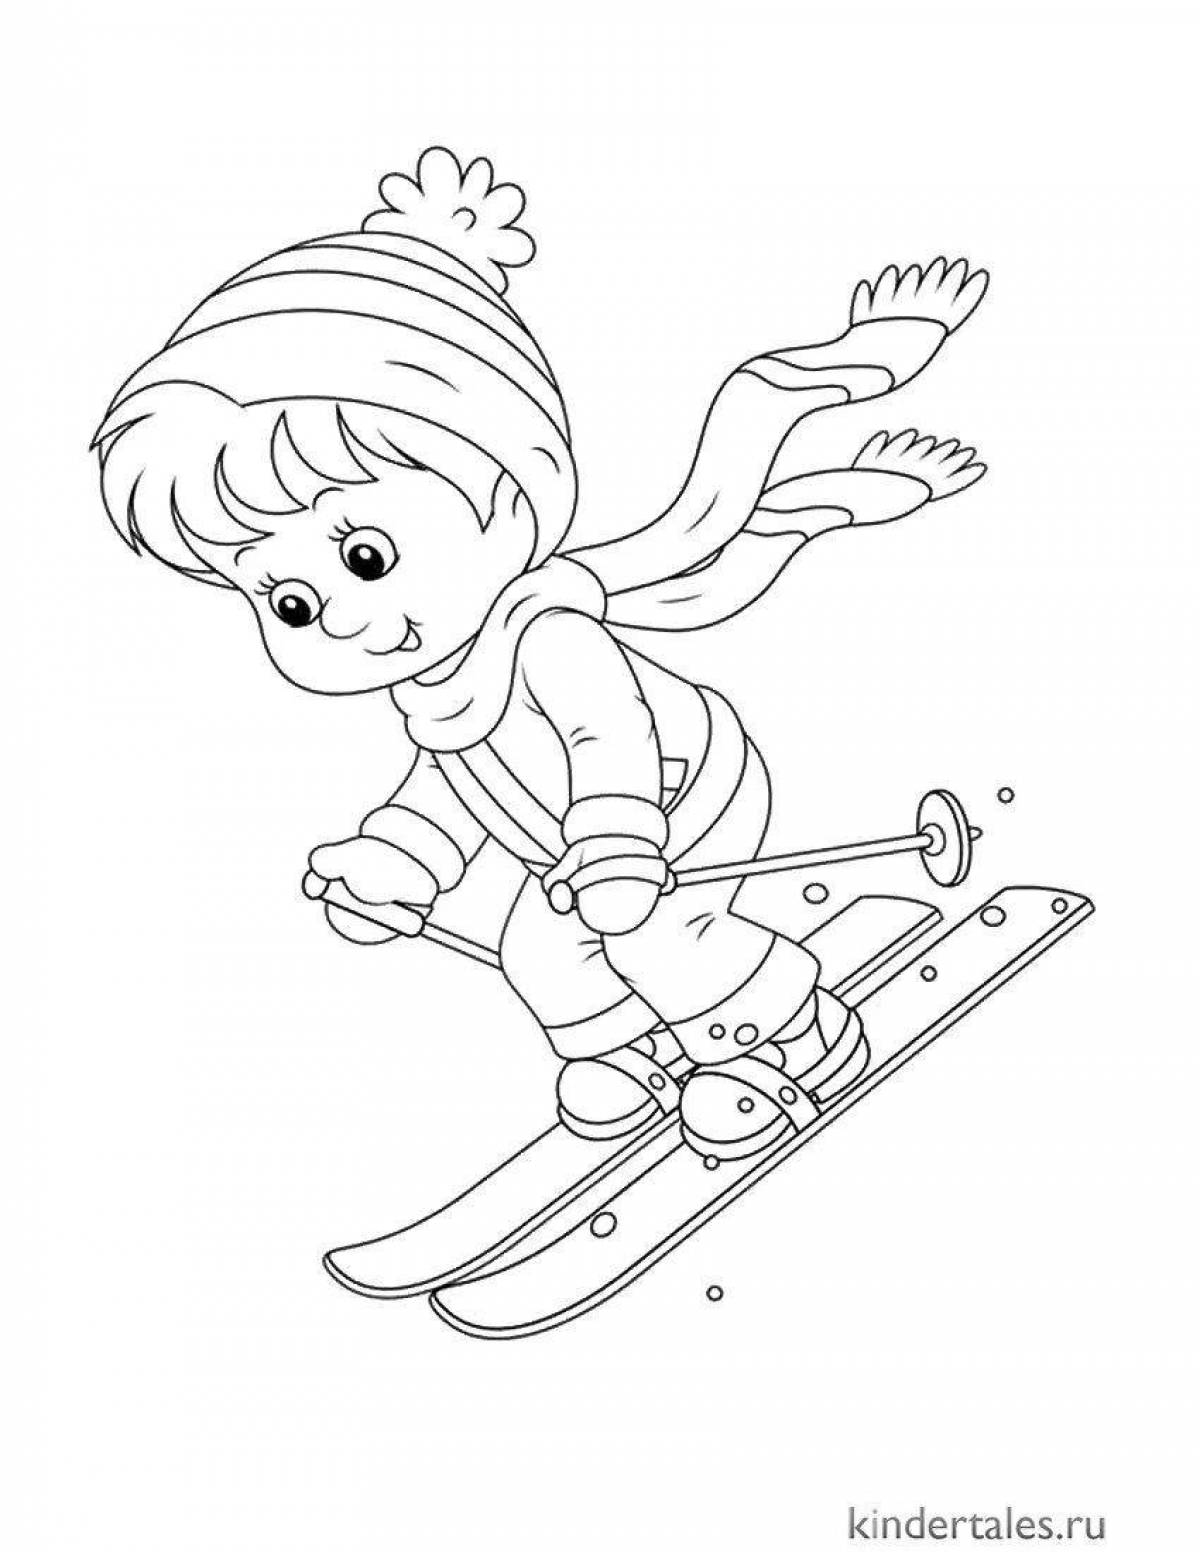 Coloring book brave baby skier